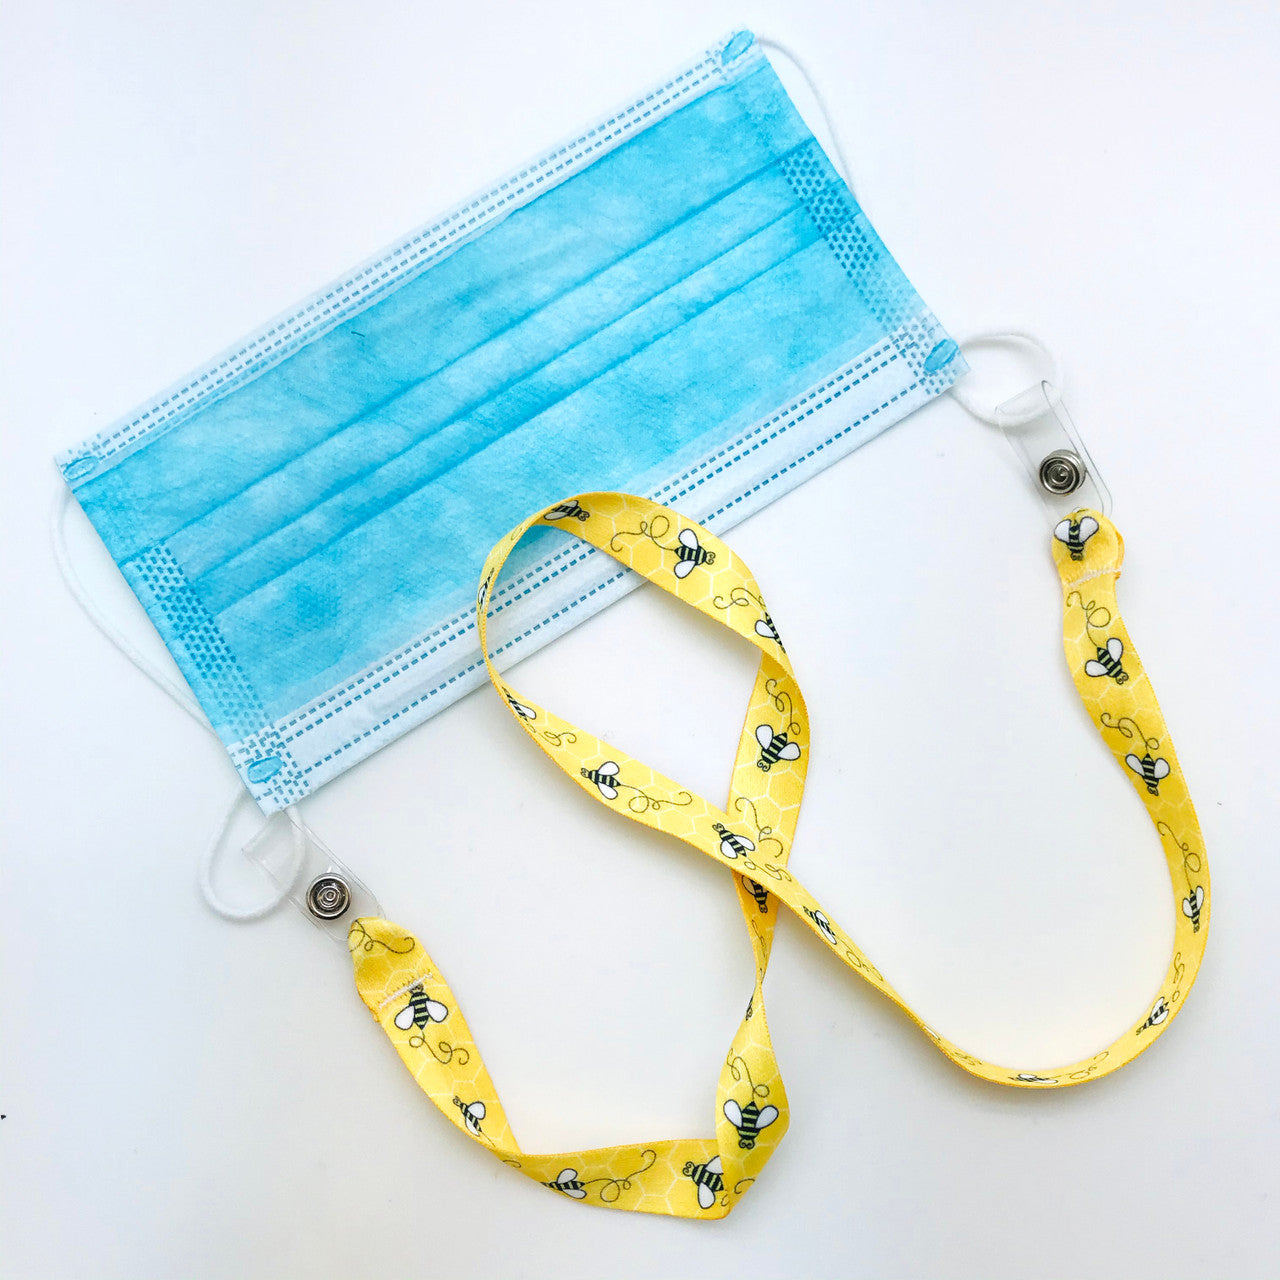 Attach the simple snap on both of the face mask loops and simply slip over the head to never lose track of your mask!